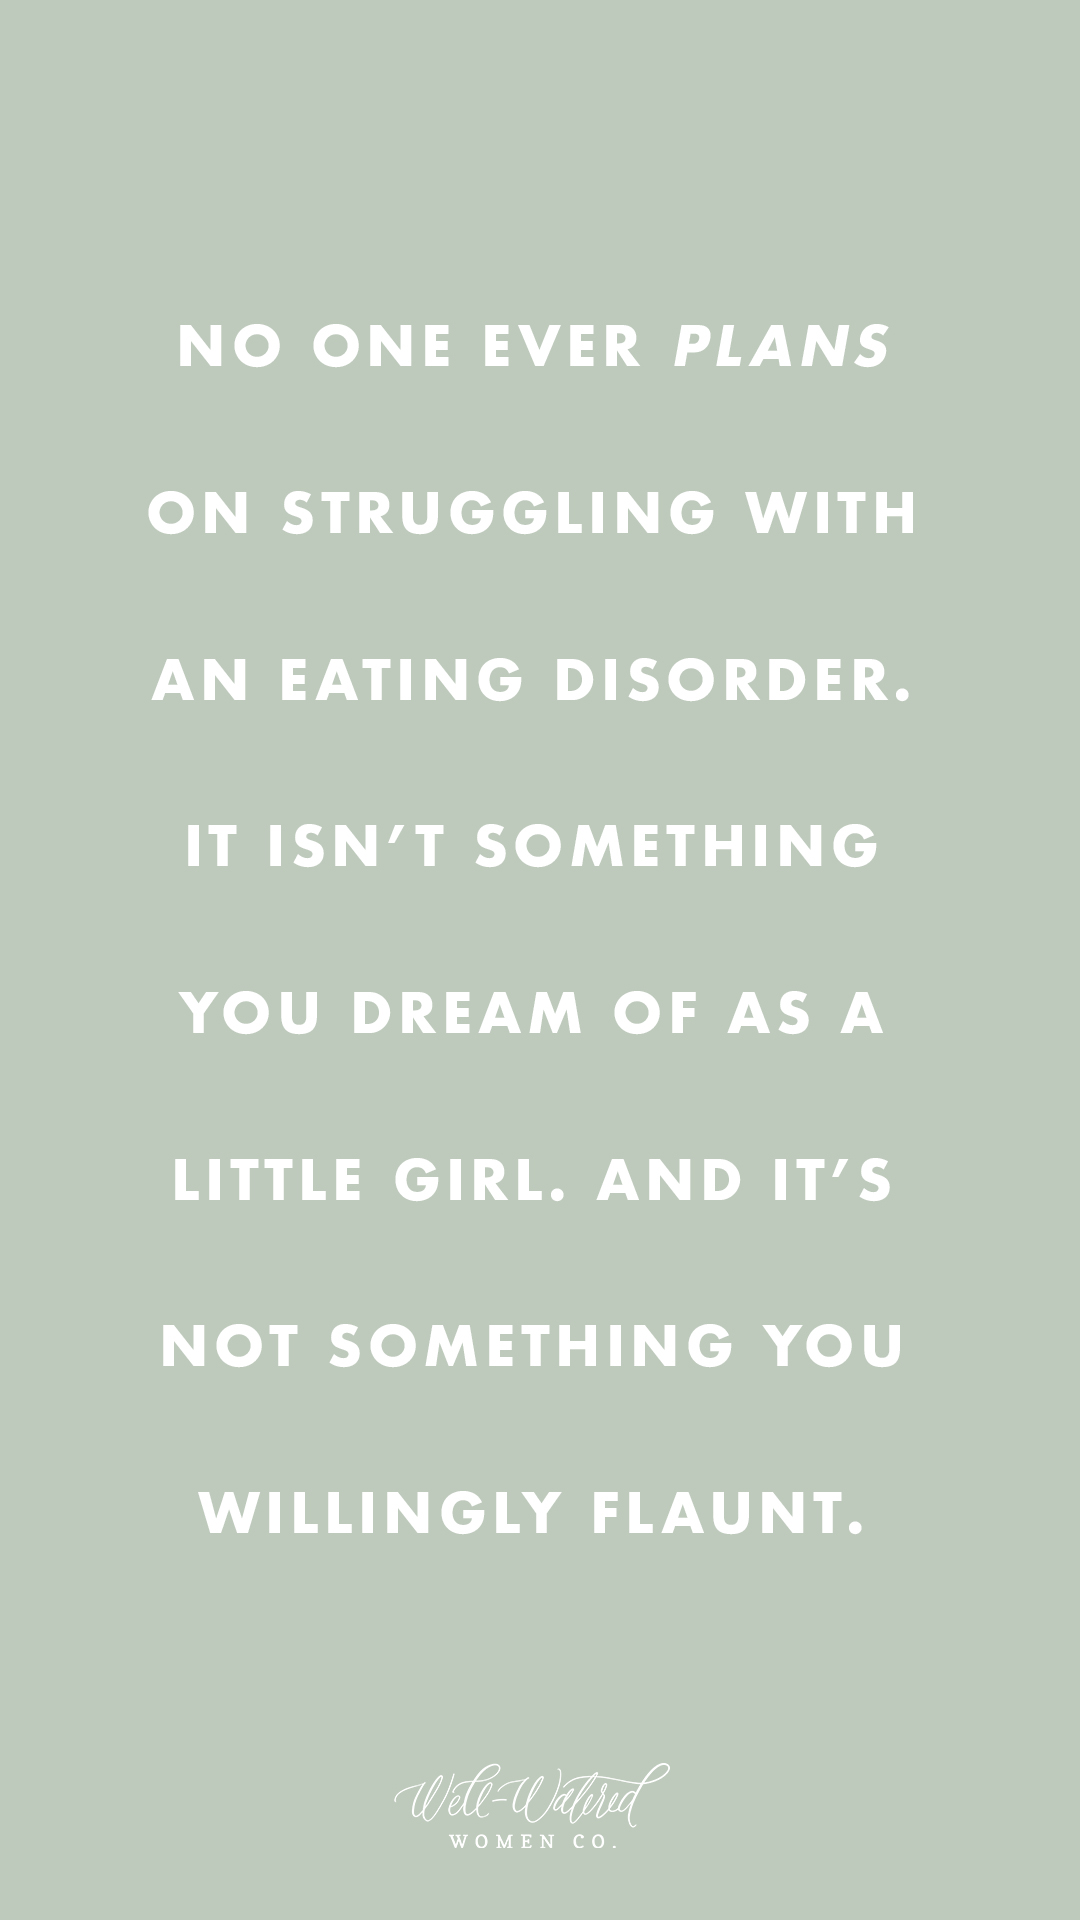 No One Ever Plans to Have an Eating Disorder